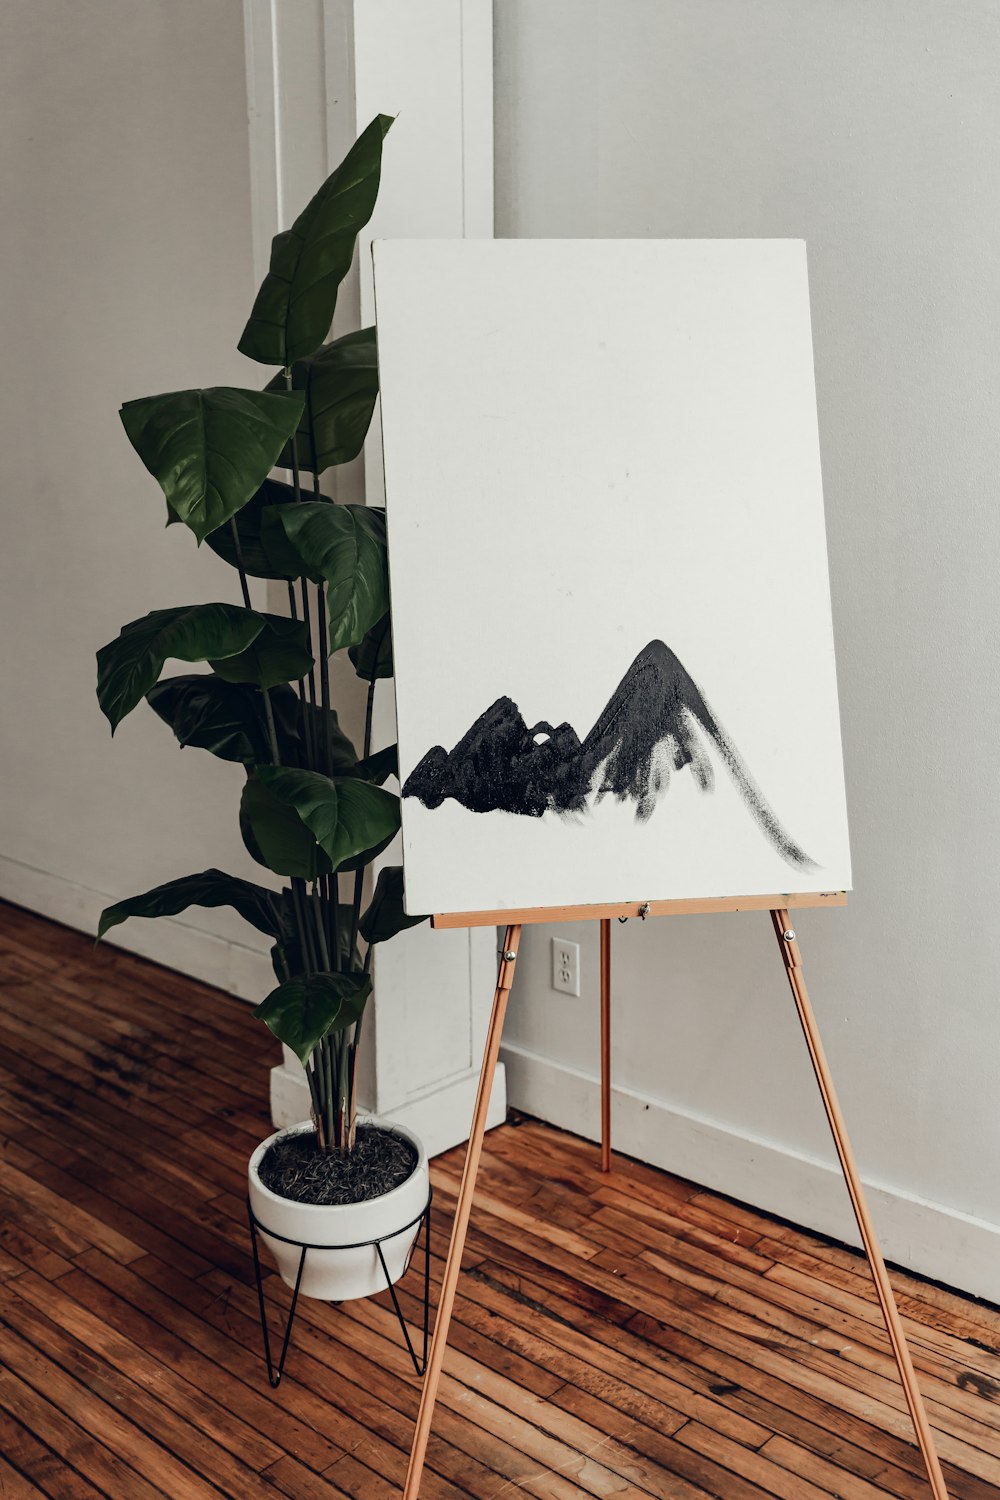 a painting on a easel next to a potted plant